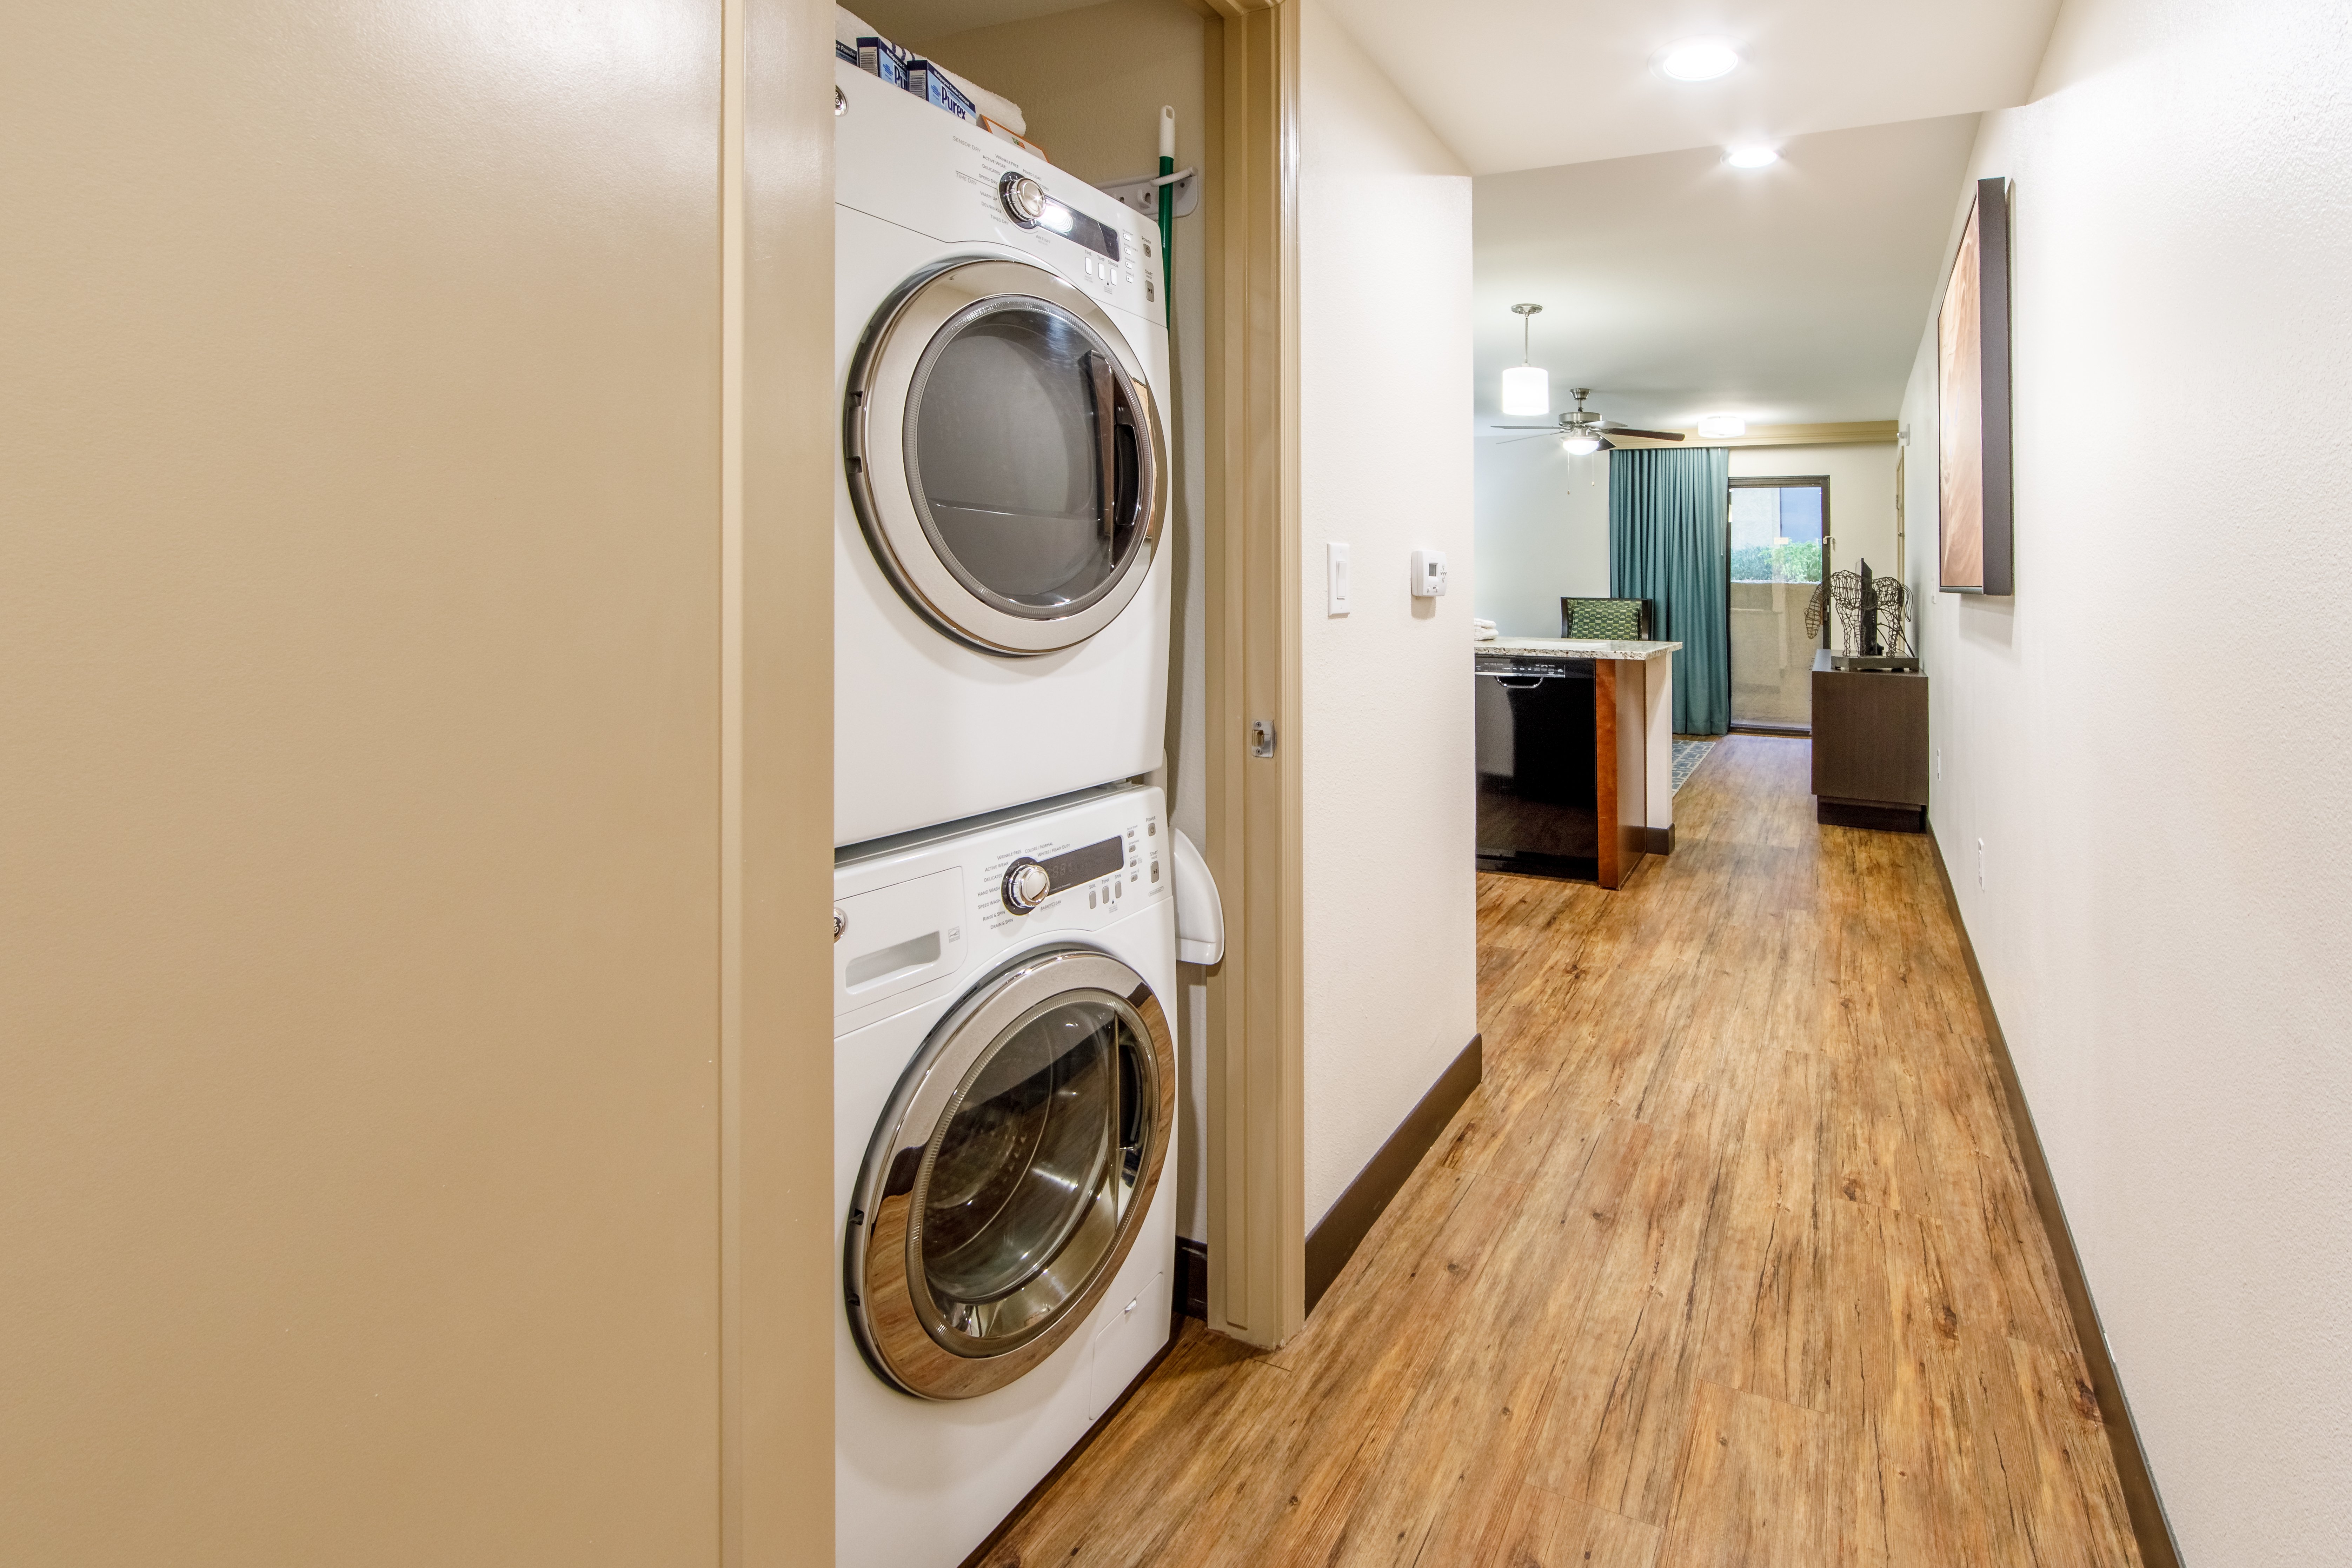 Enjoy the ease of an in-unit washer and dryer